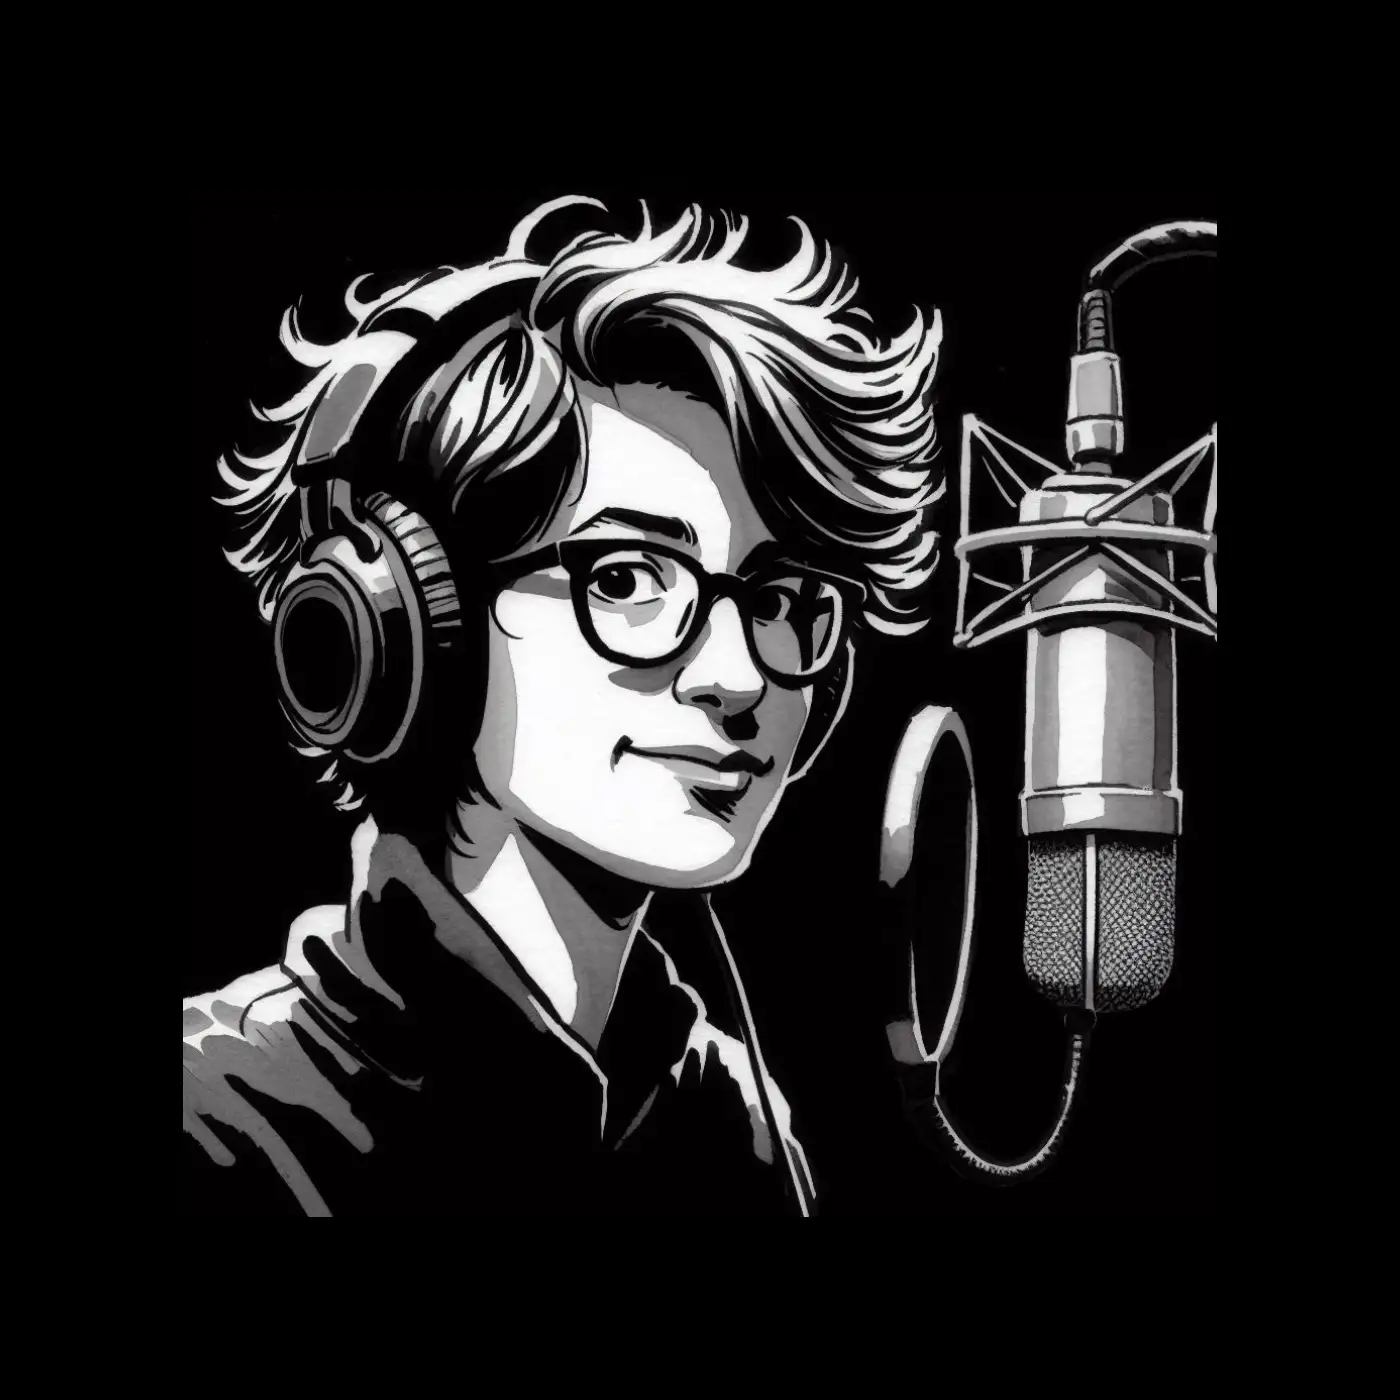 Samantha Scathe, a spunky woman with short hair and glasses, at a microphone